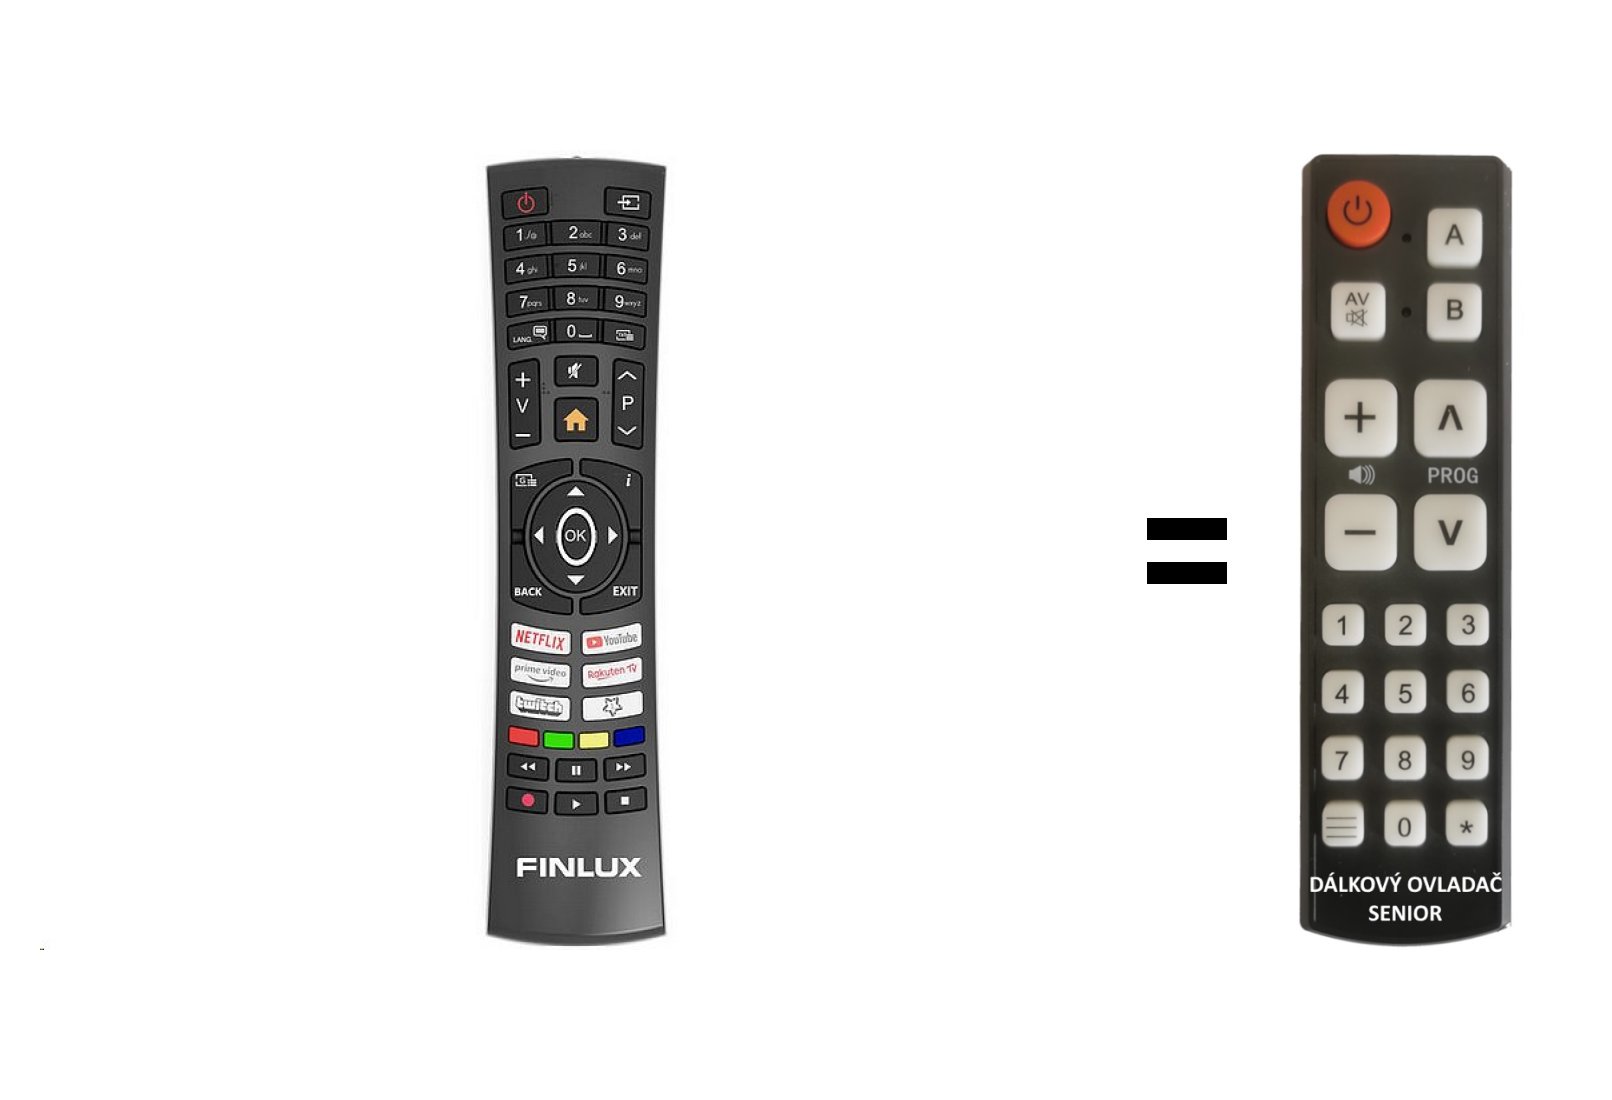 Finlux TVF32FFMG5760 replacement remote control for seniors